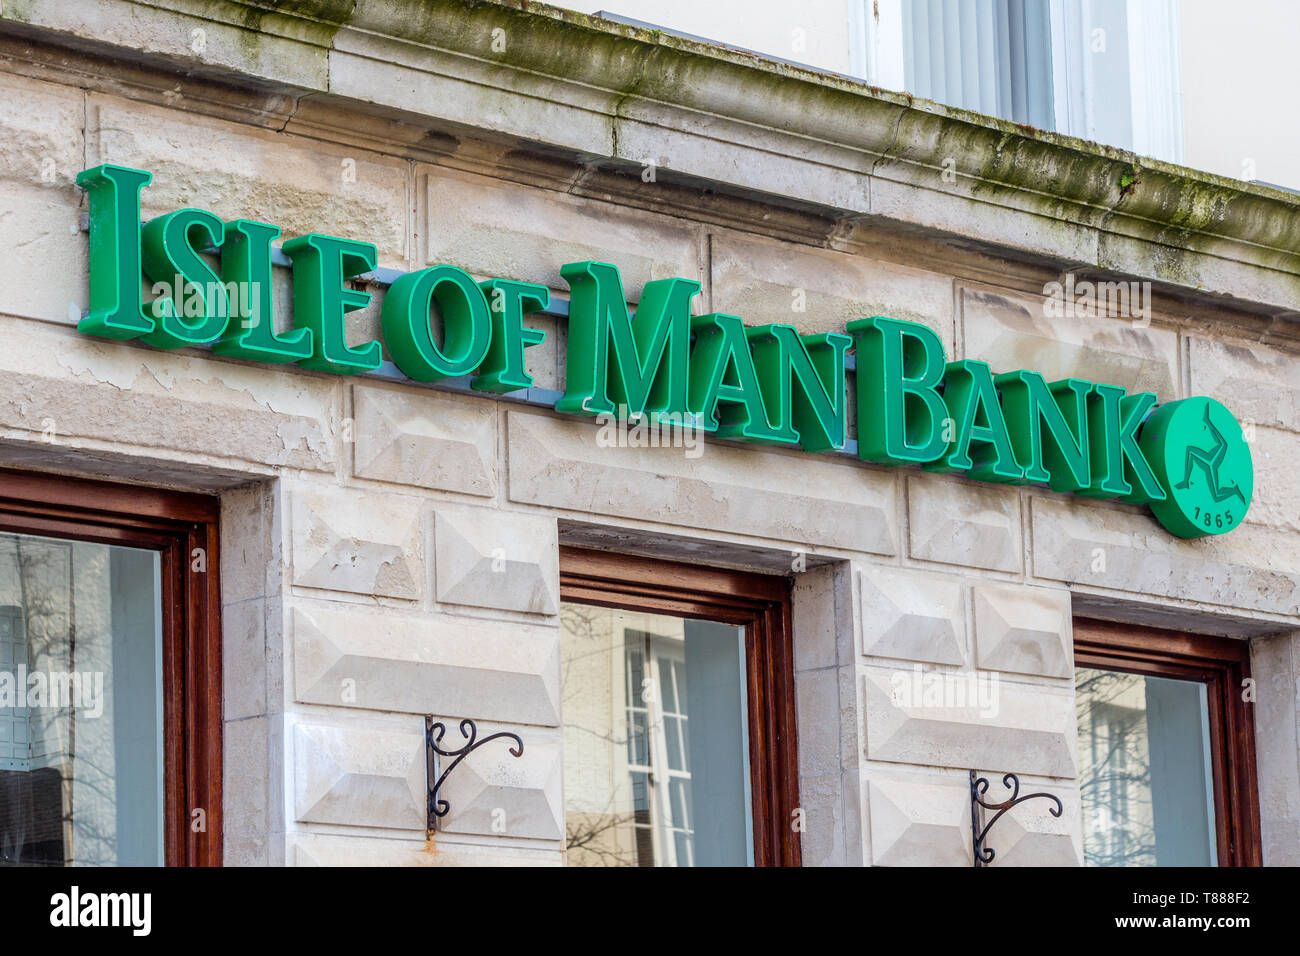 Isle of Man bank branch in Castletown, Isle of Man Stock Photo